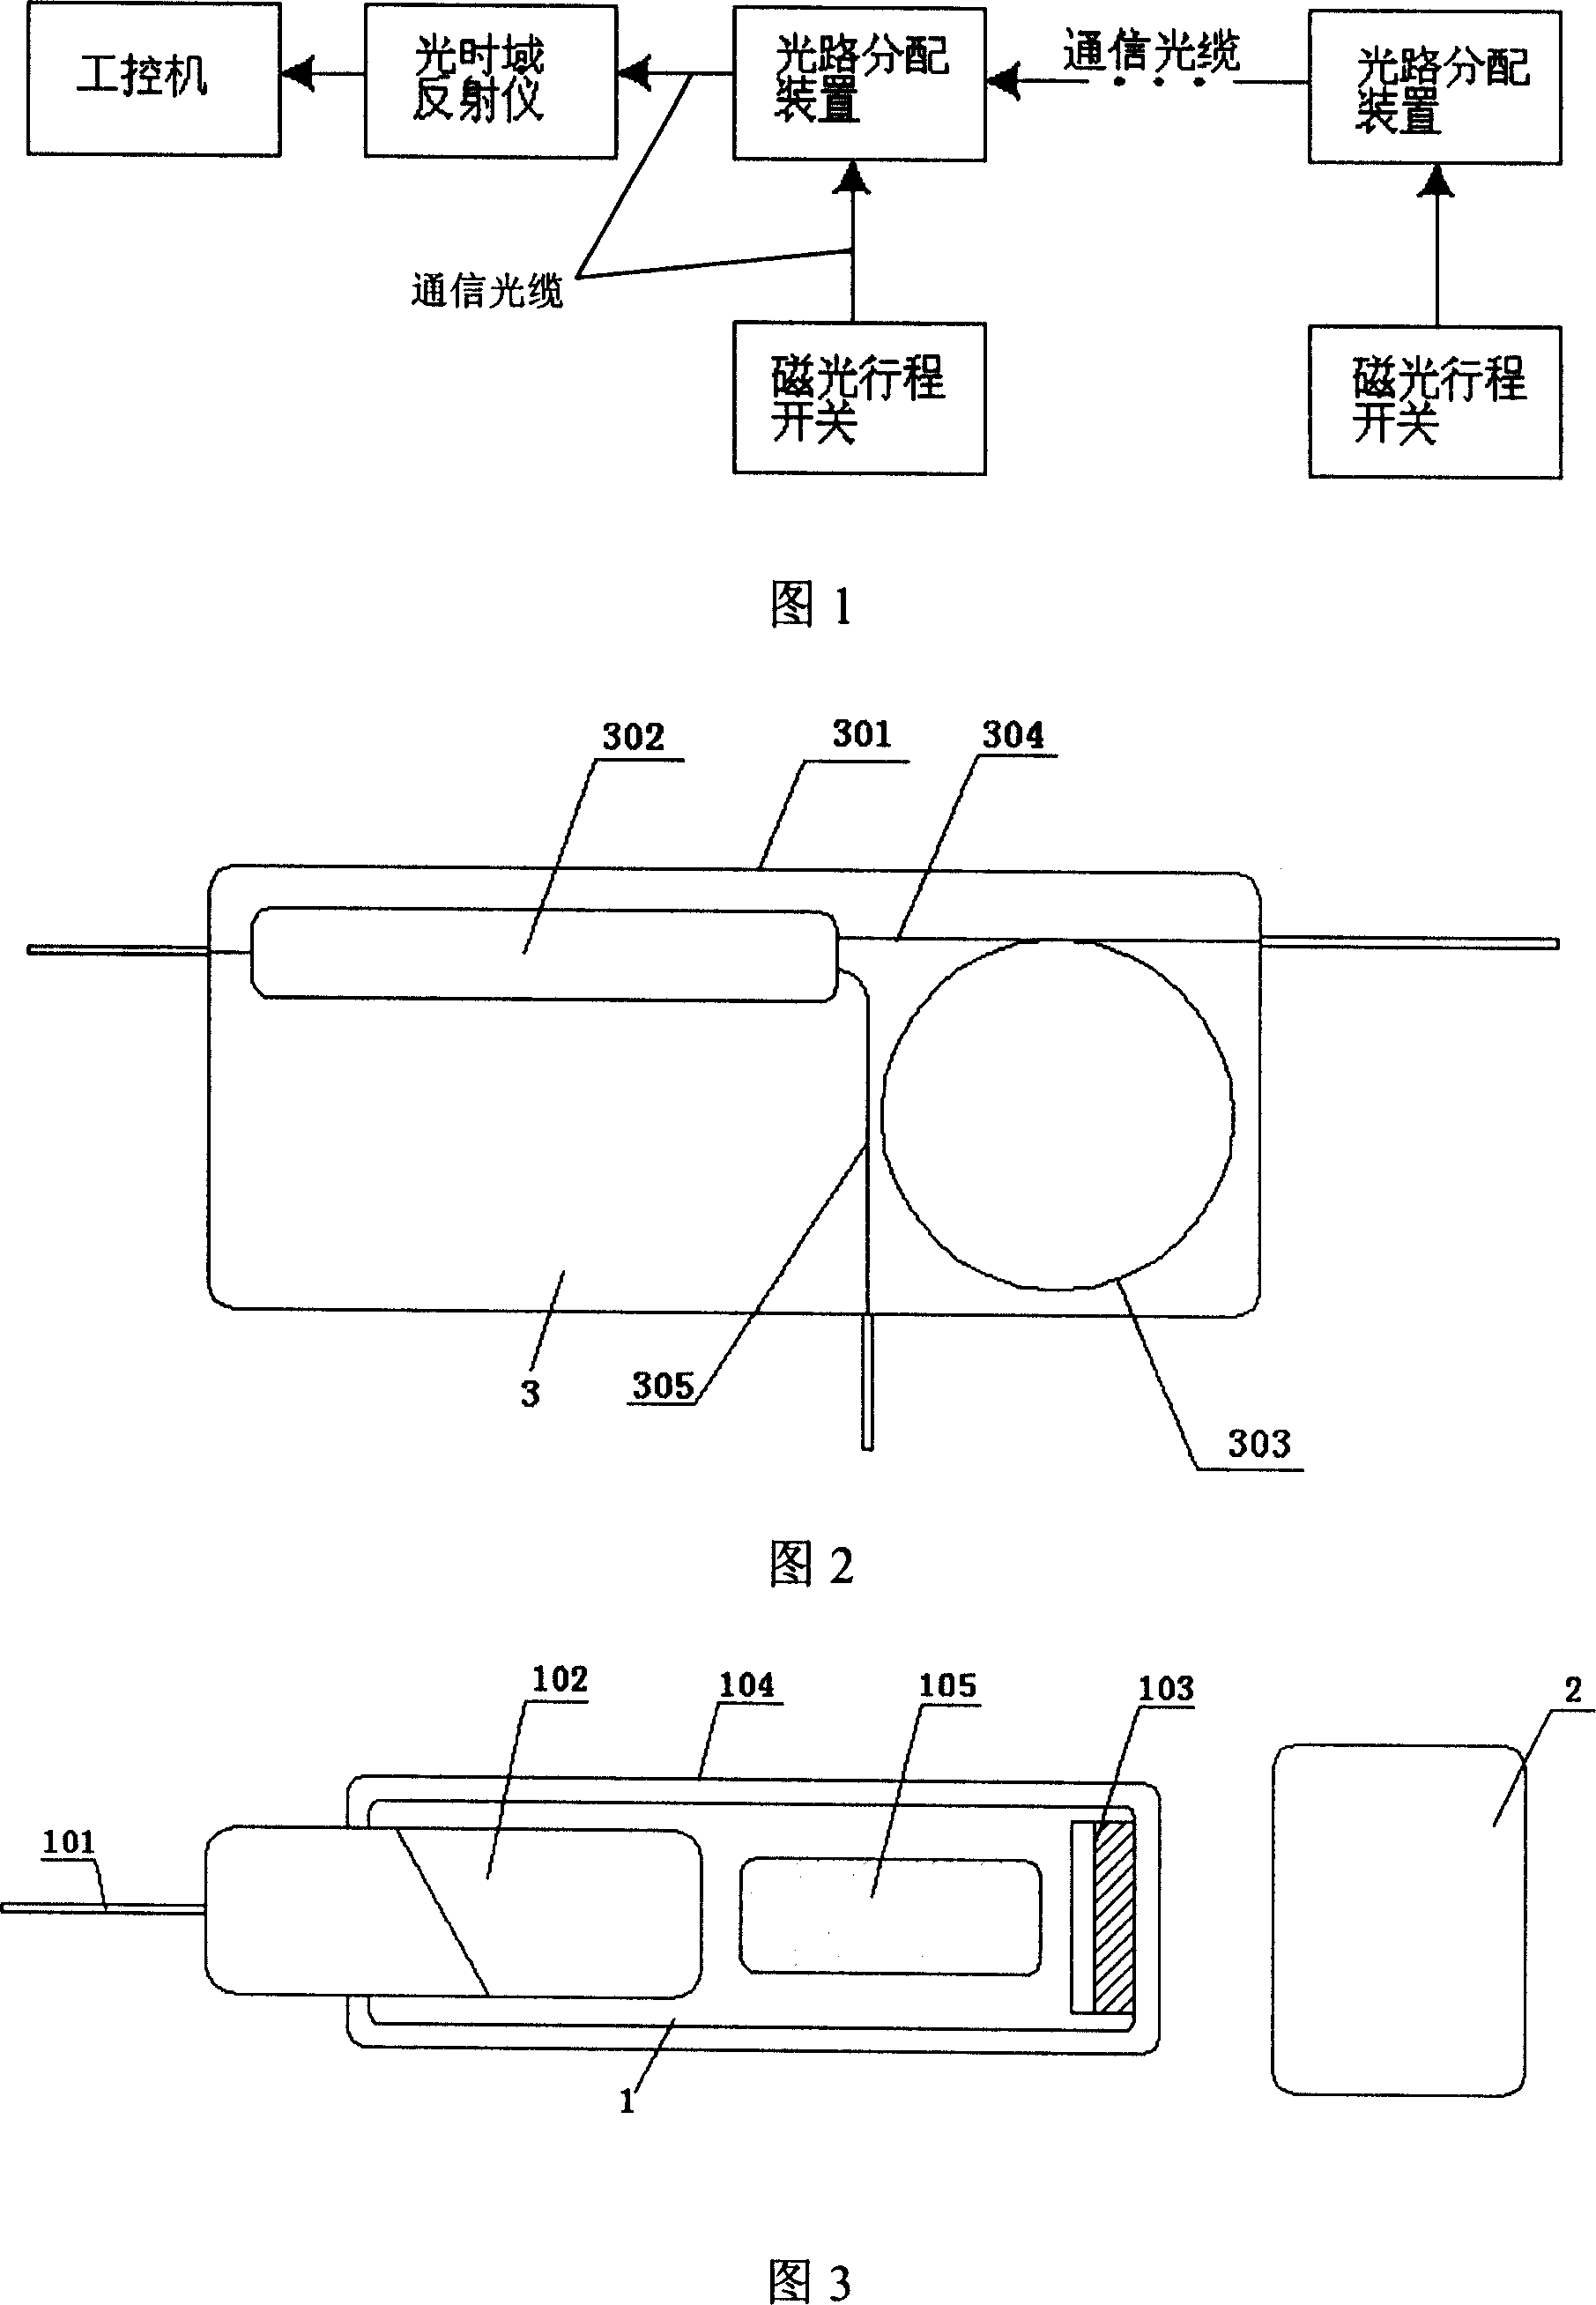 Monitoring system of optical fiber remote multi-point switch status